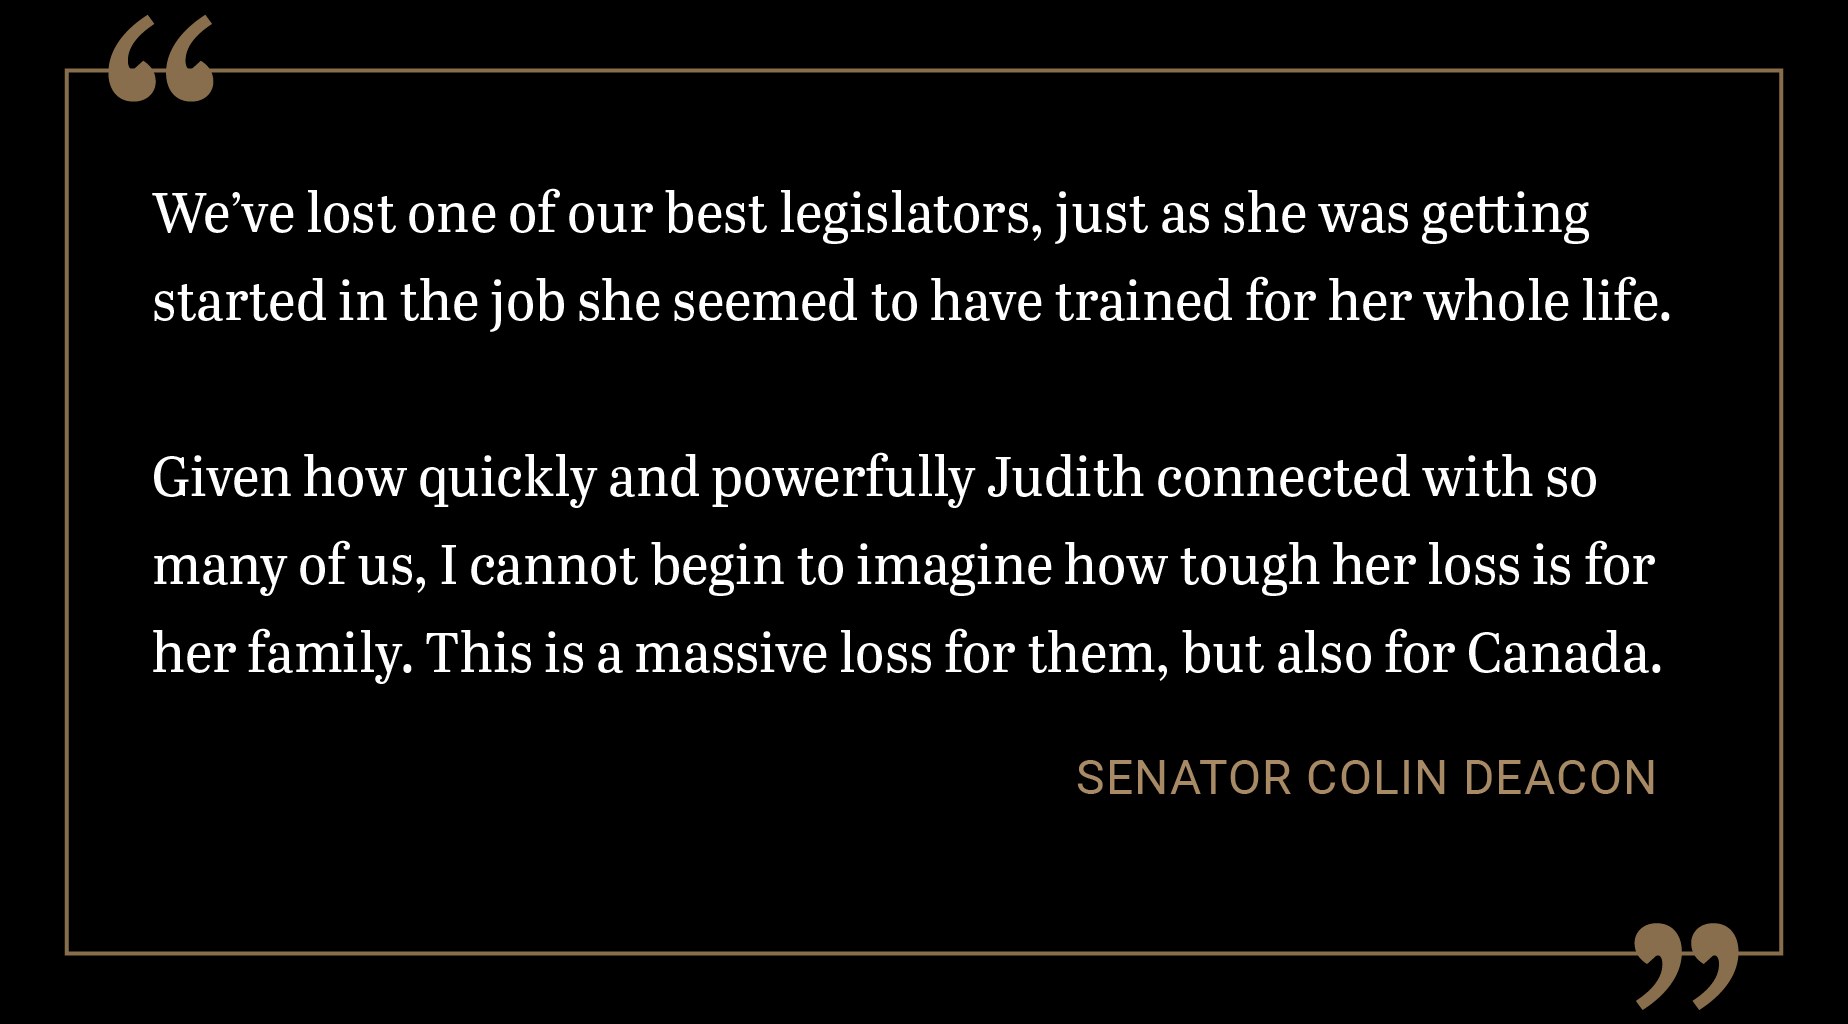 We’ve lost one of our best legislators, just as she was getting started in the job she seemed to have trained for her whole life. Given how quickly and powerfully Judith connected with so many of us, I cannot begin to imagine how tough her loss is for her family. This is a massive loss for them, but also for Canada.